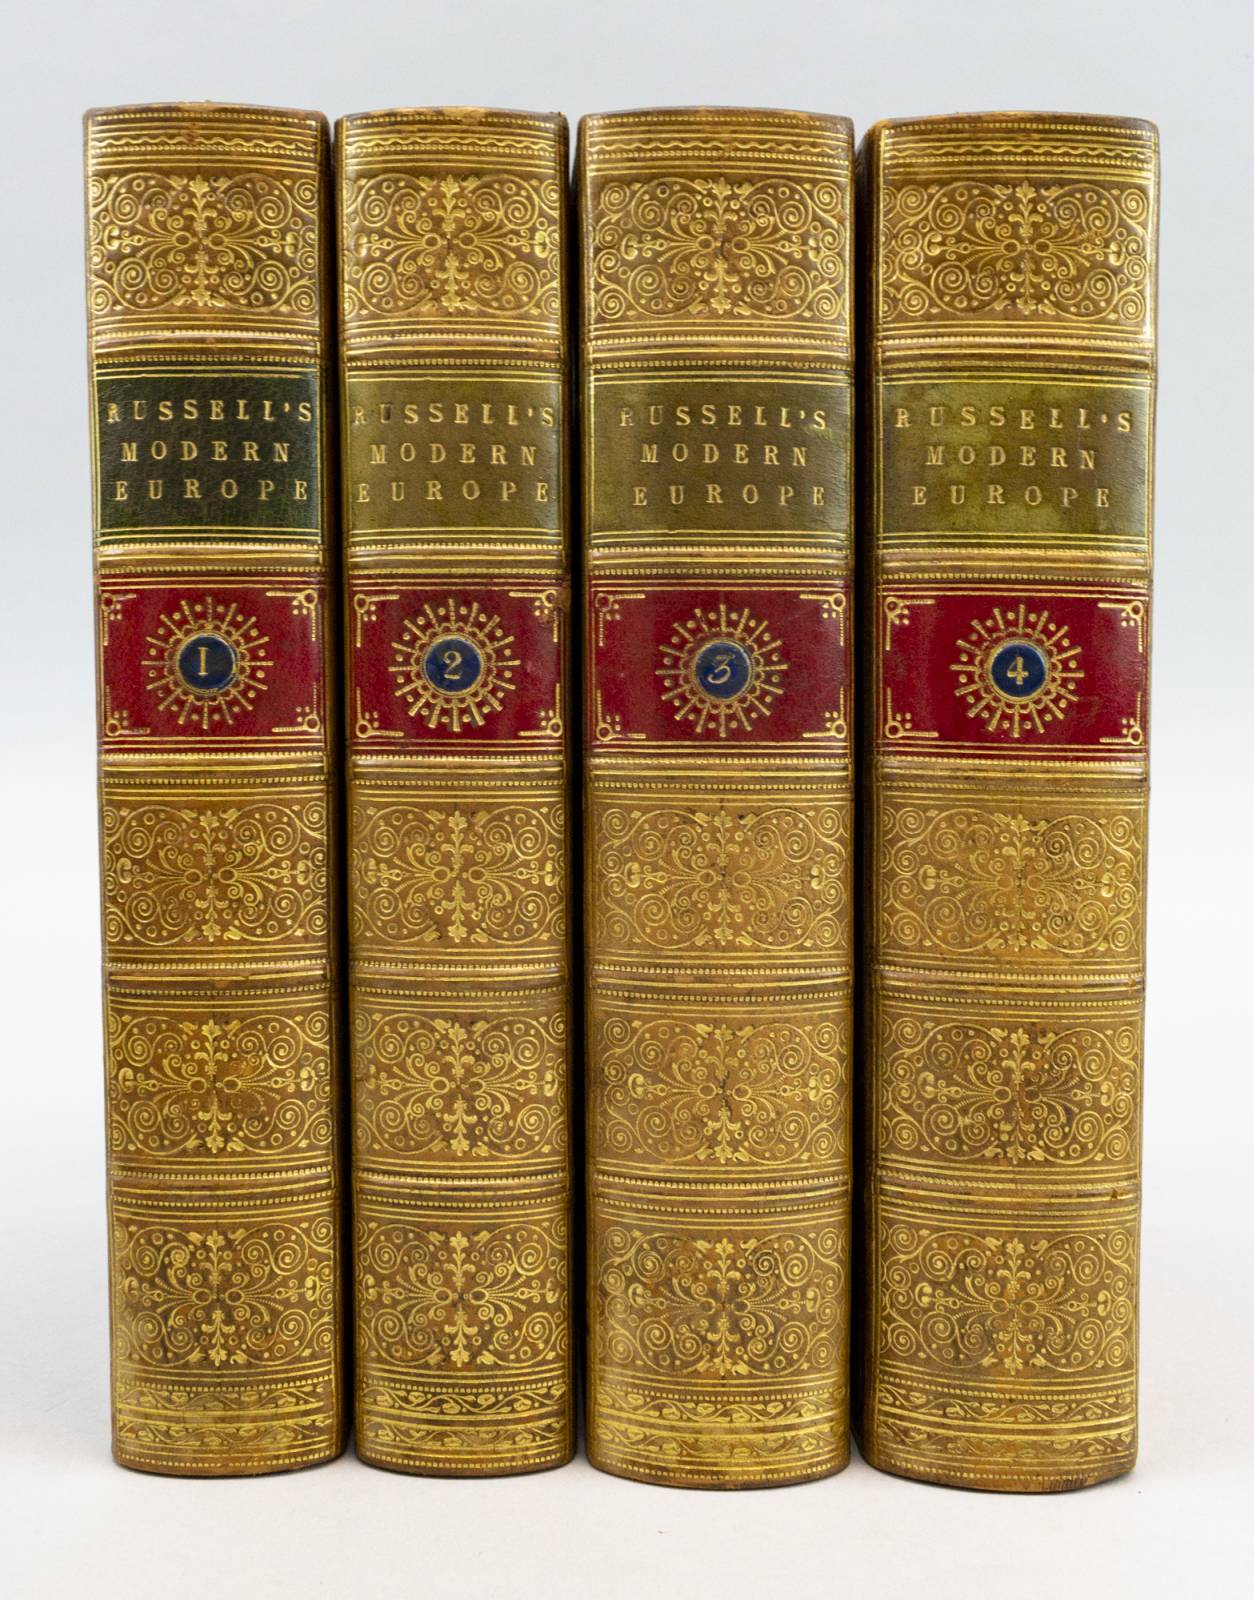 Pirages | RUSSELL, WILLIAM. THE HISTORY OF MODERN EUROPE. 1850. on Phillip  J. Pirages Fine Books and Manuscripts